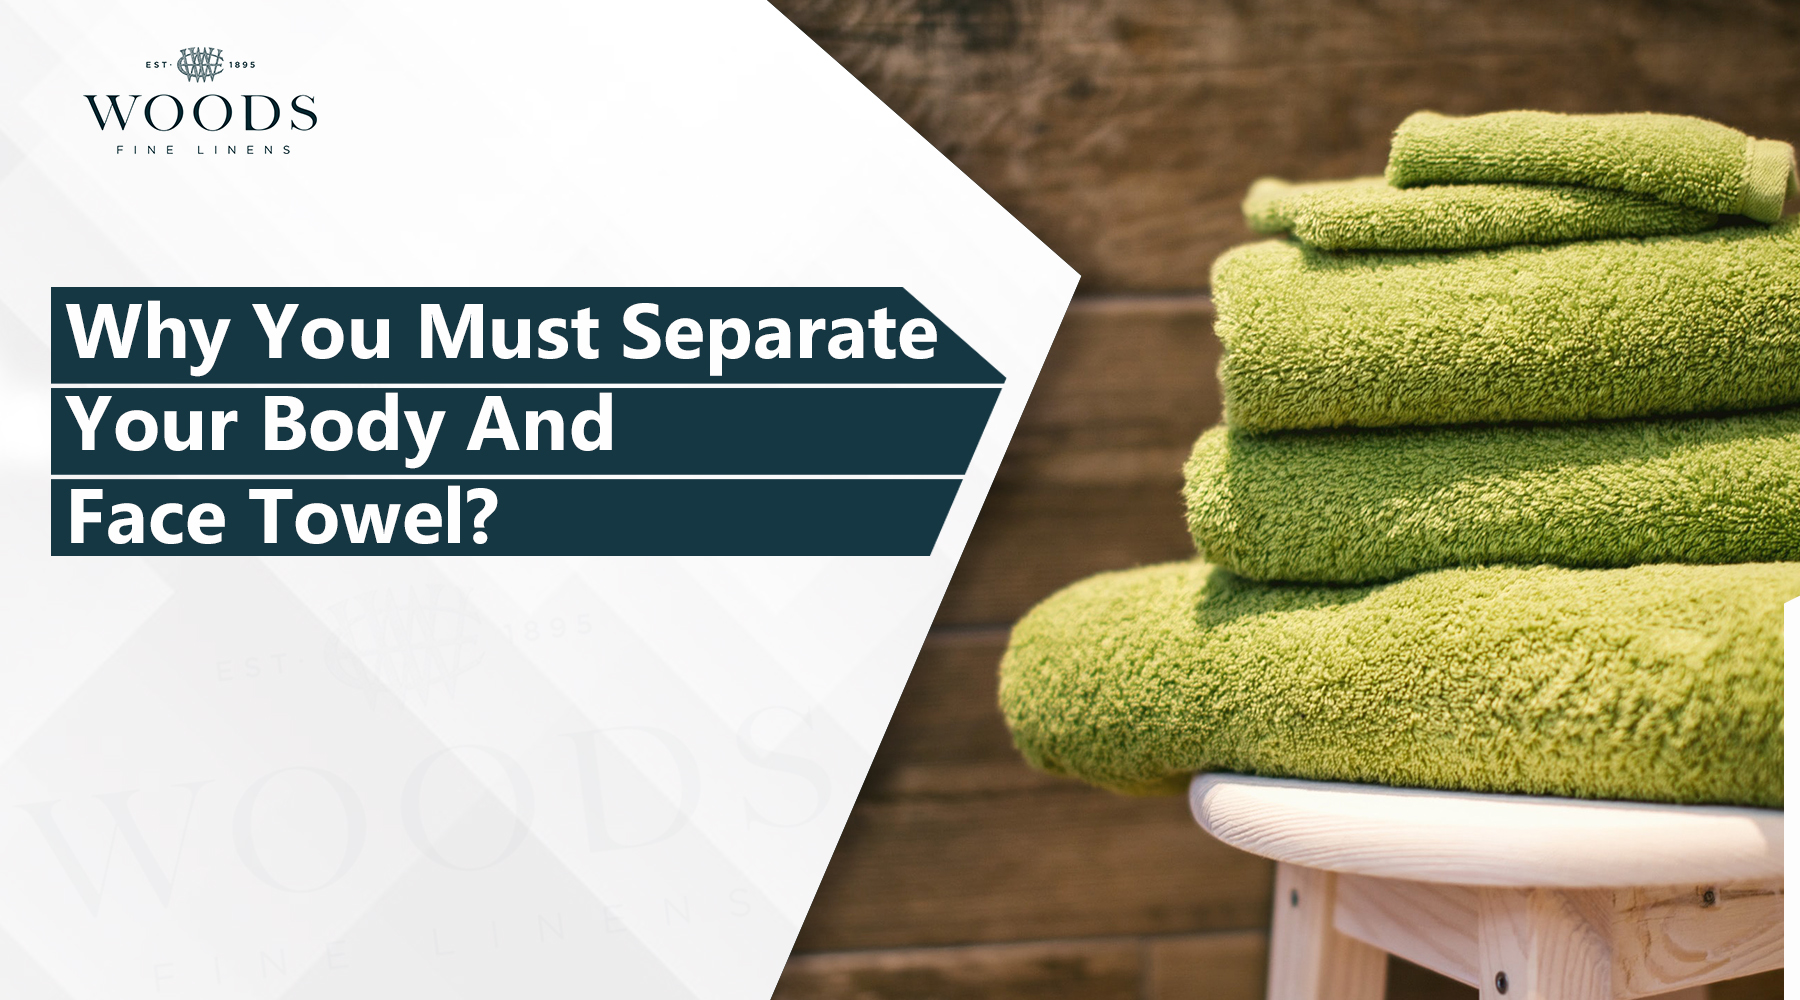 Why You Must Separate Your Body And Face Towel?